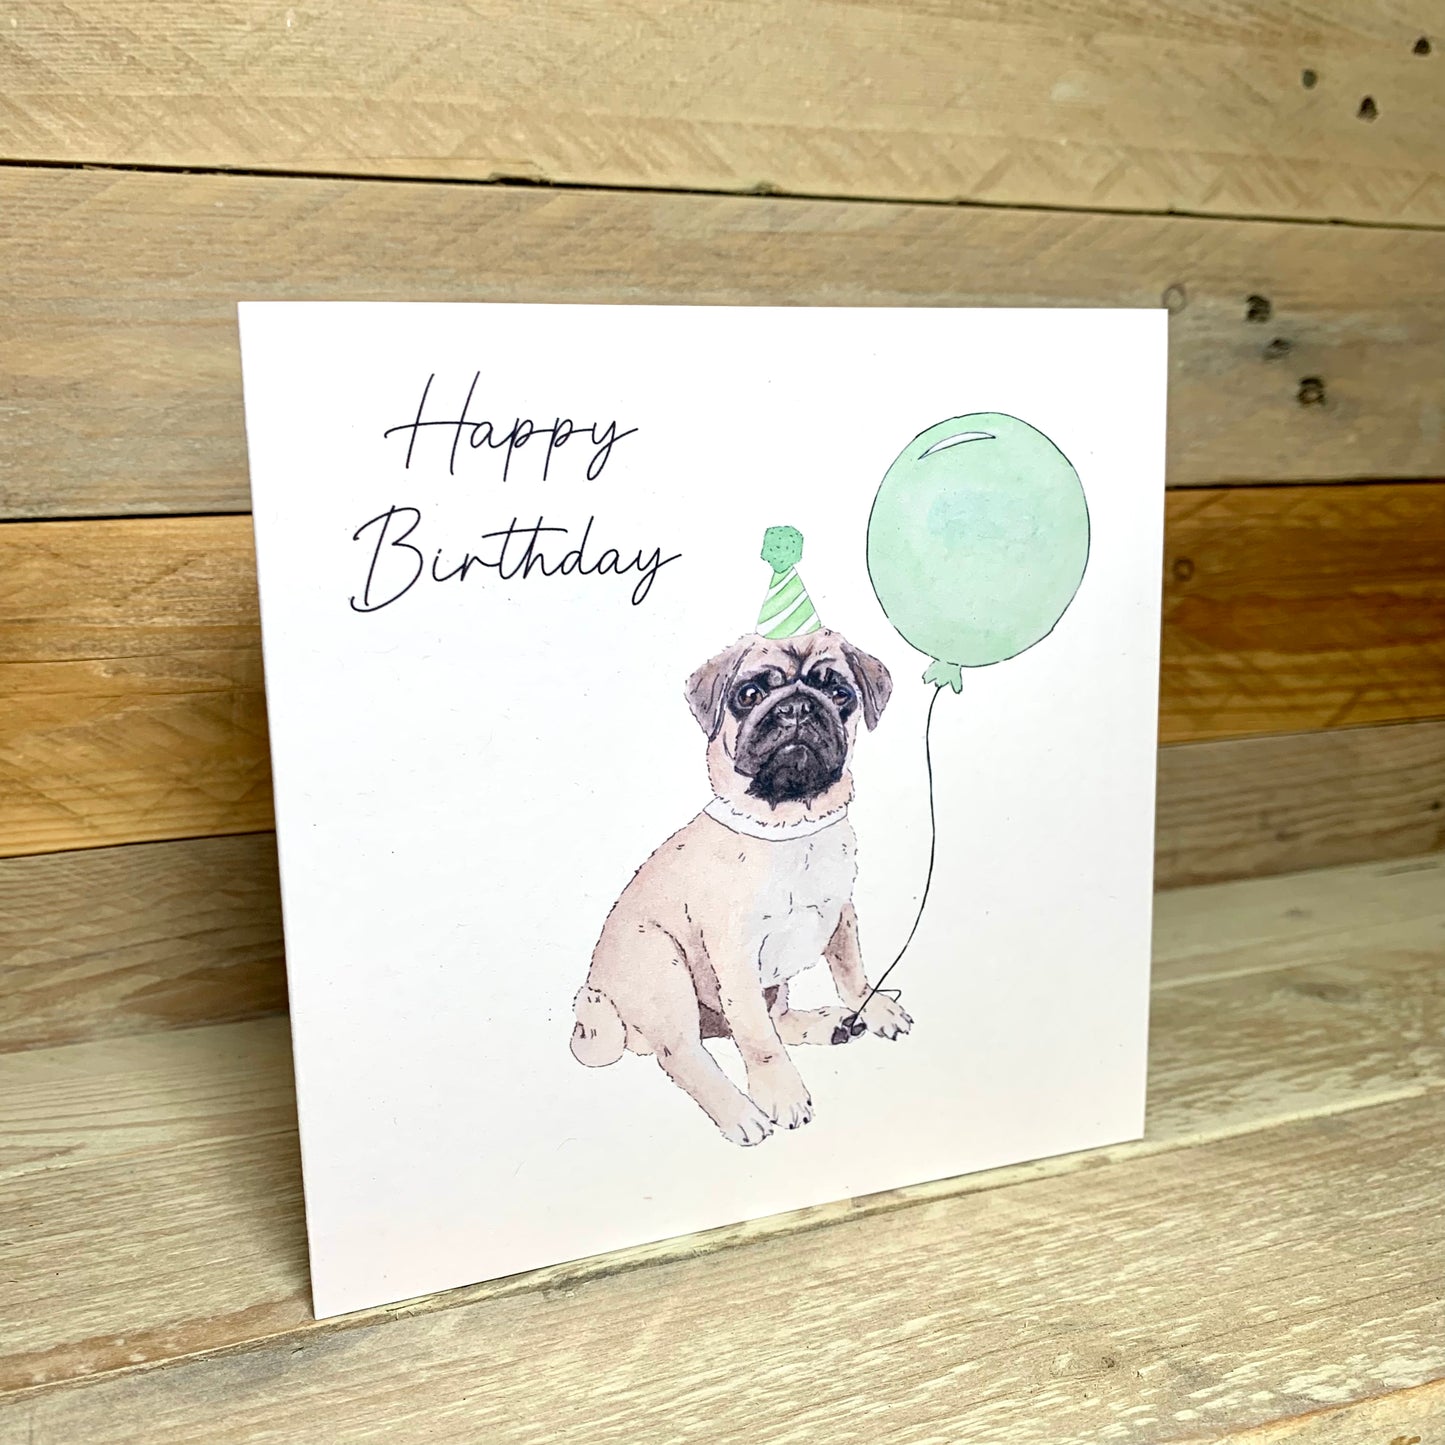 Kevin The Partying Pug Birthday Card